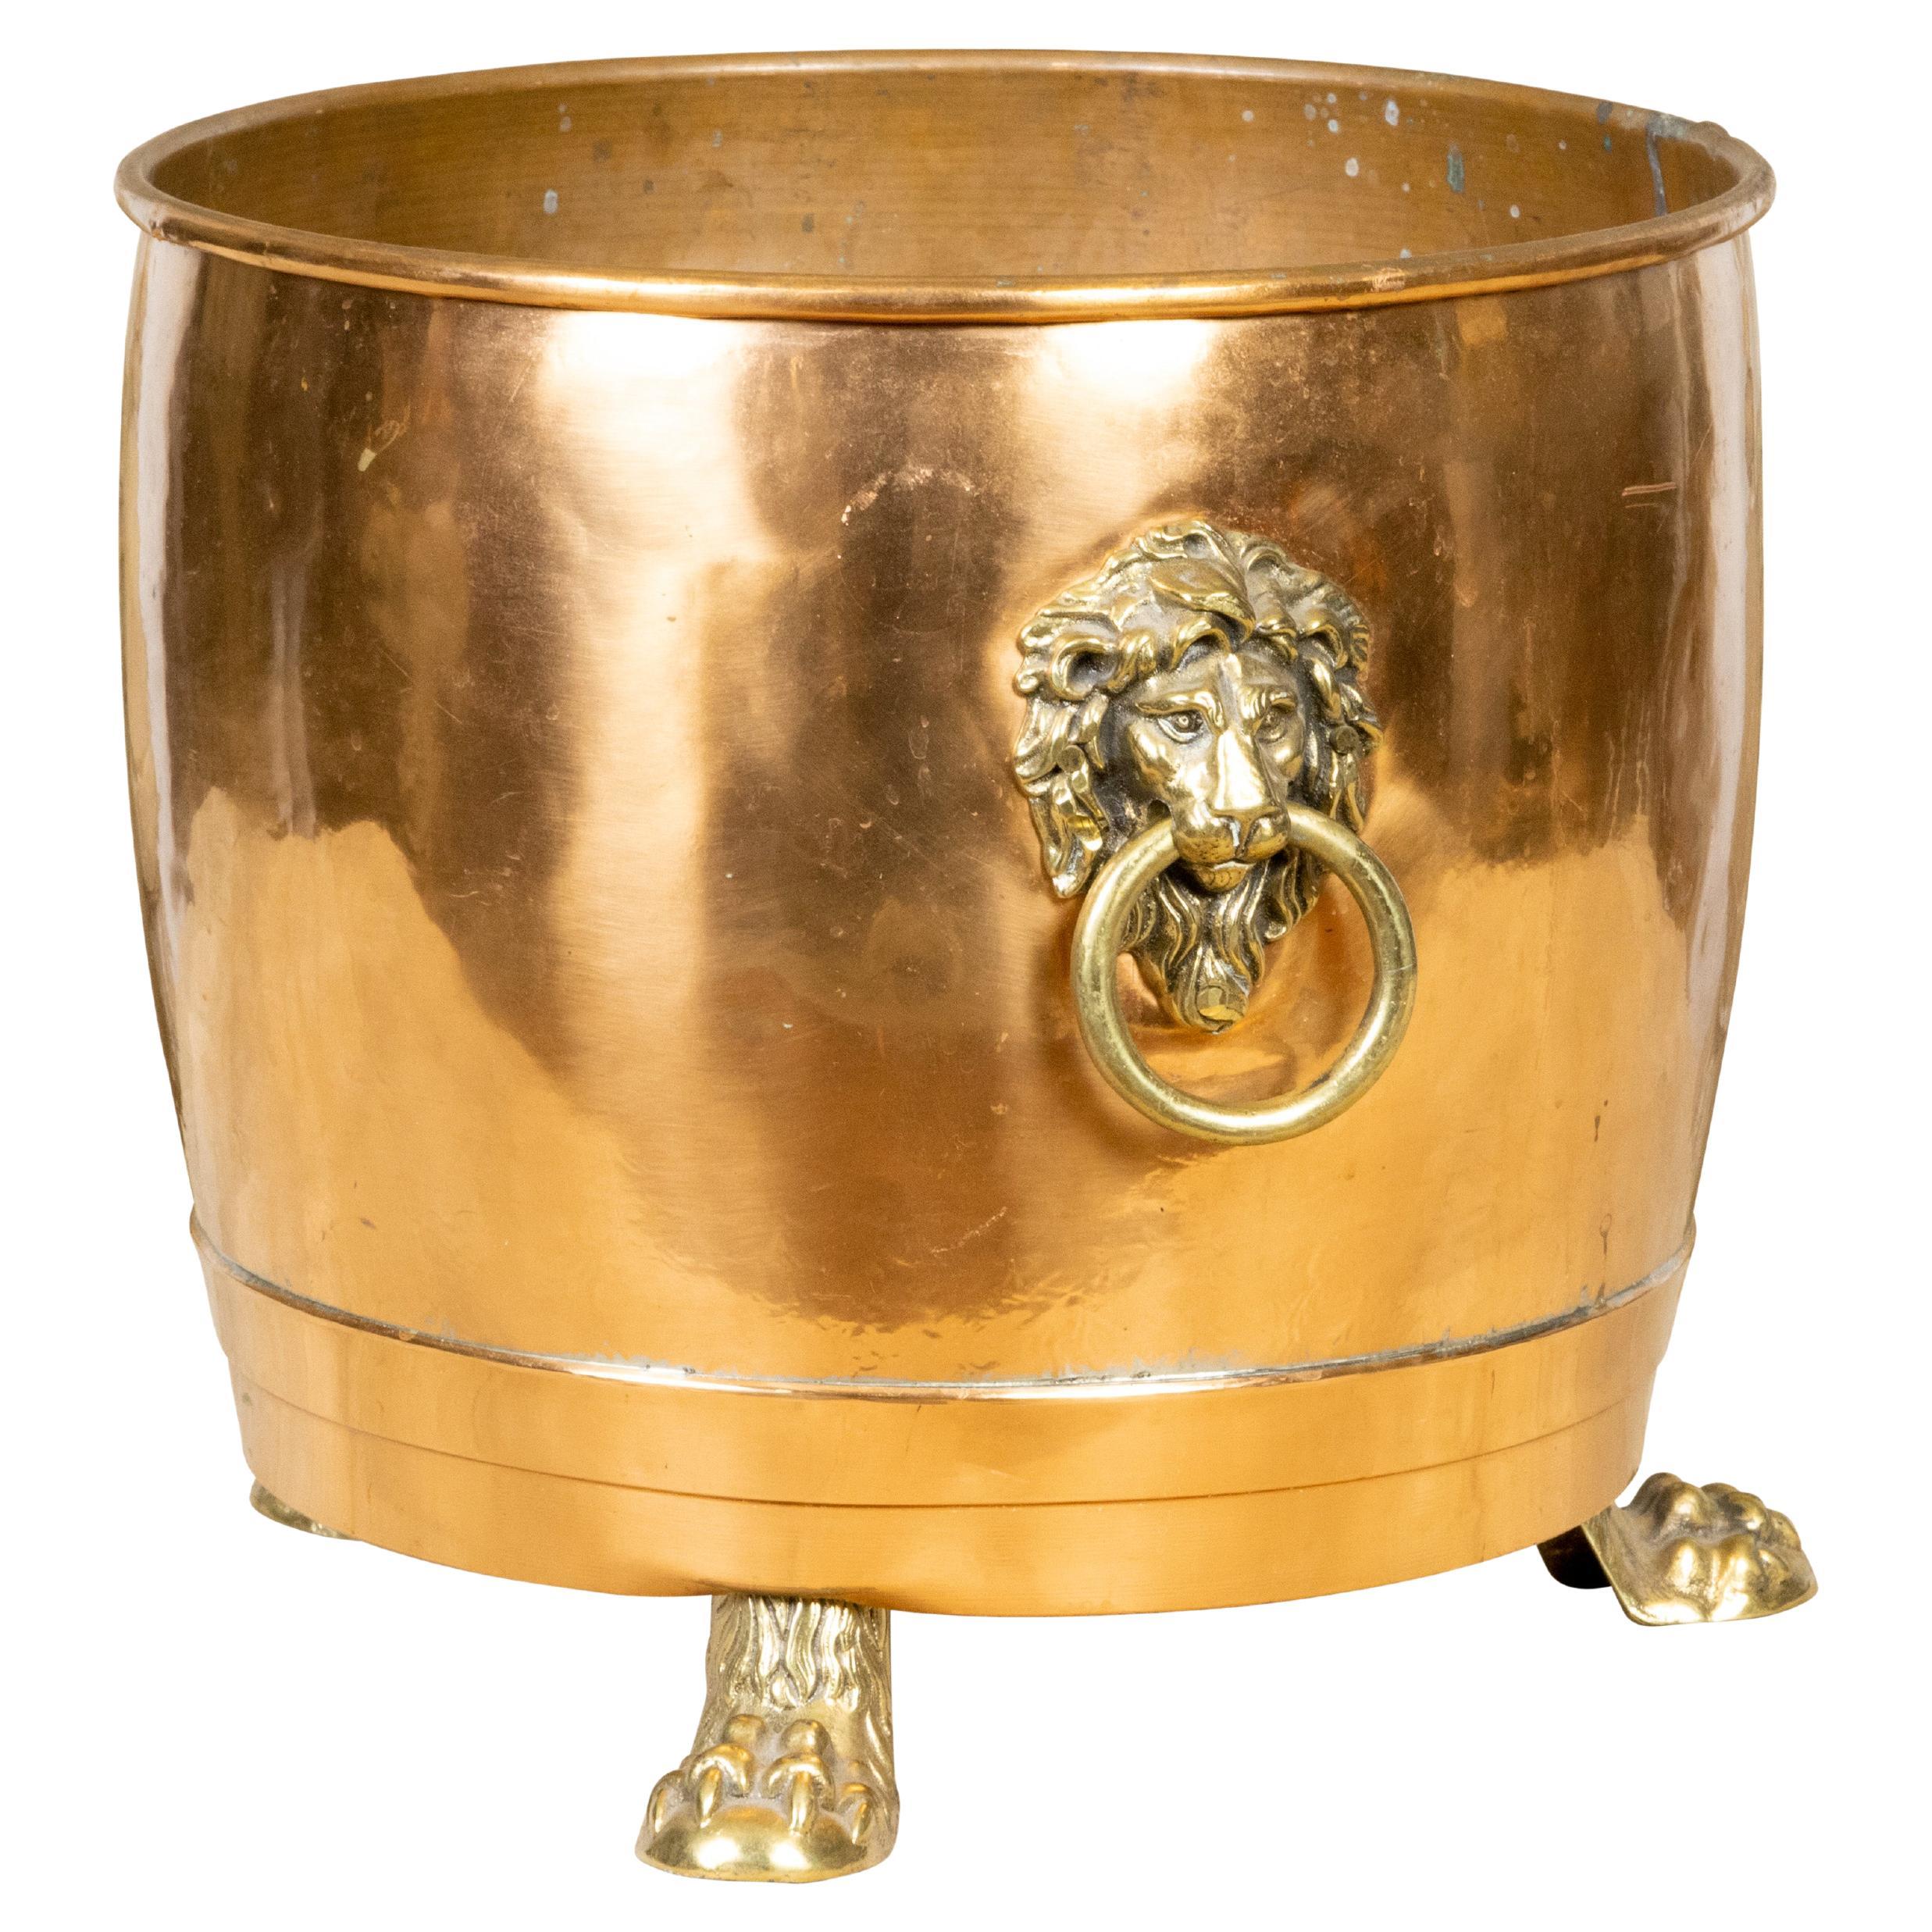 English Turn of the Century 1900s Copper and Brass Planter with Lion Paw Feet For Sale